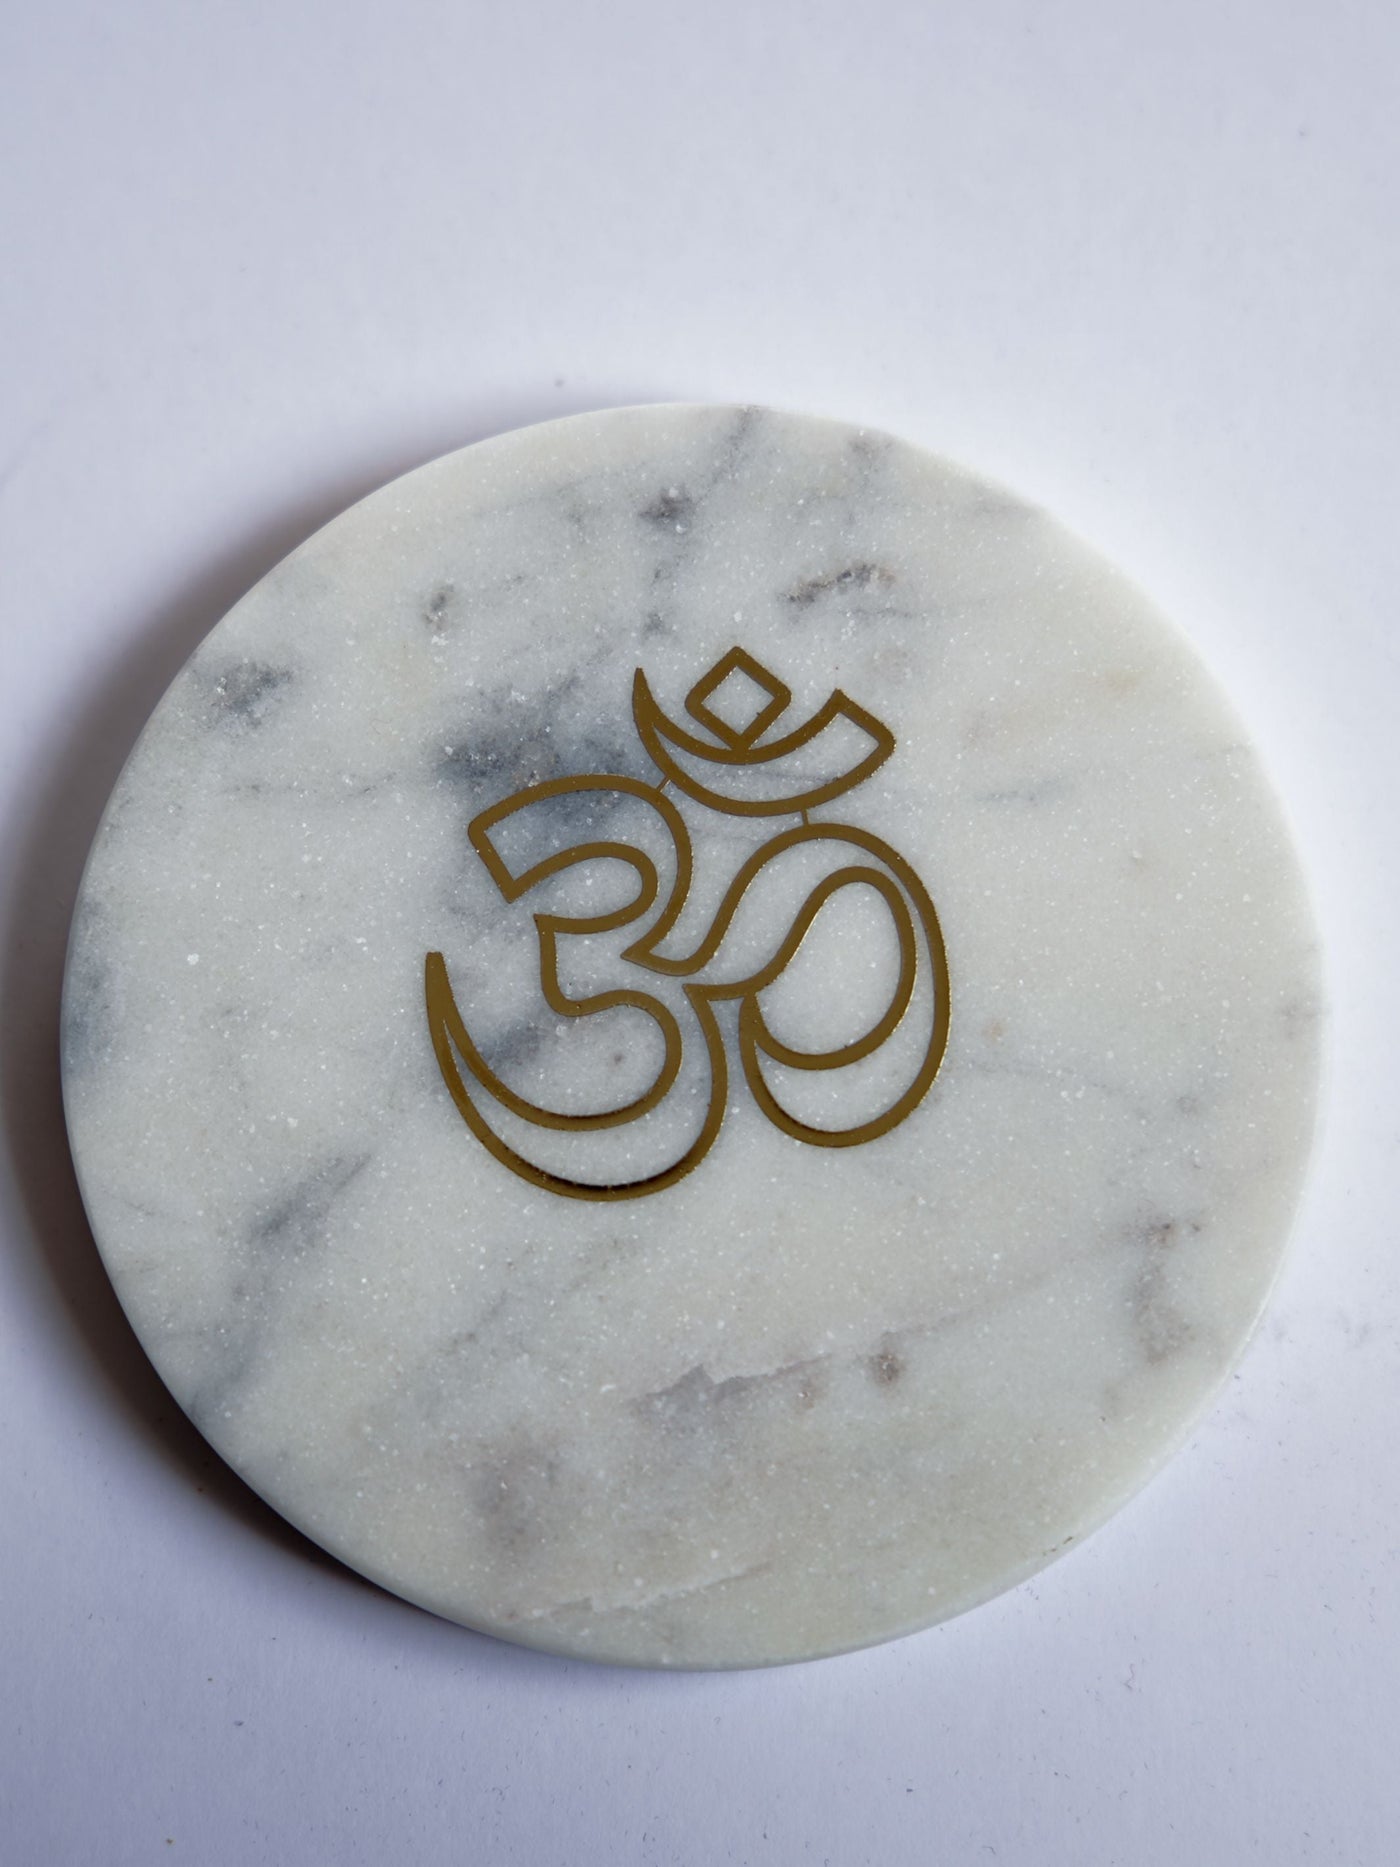 OM with Marble - Metal Holder